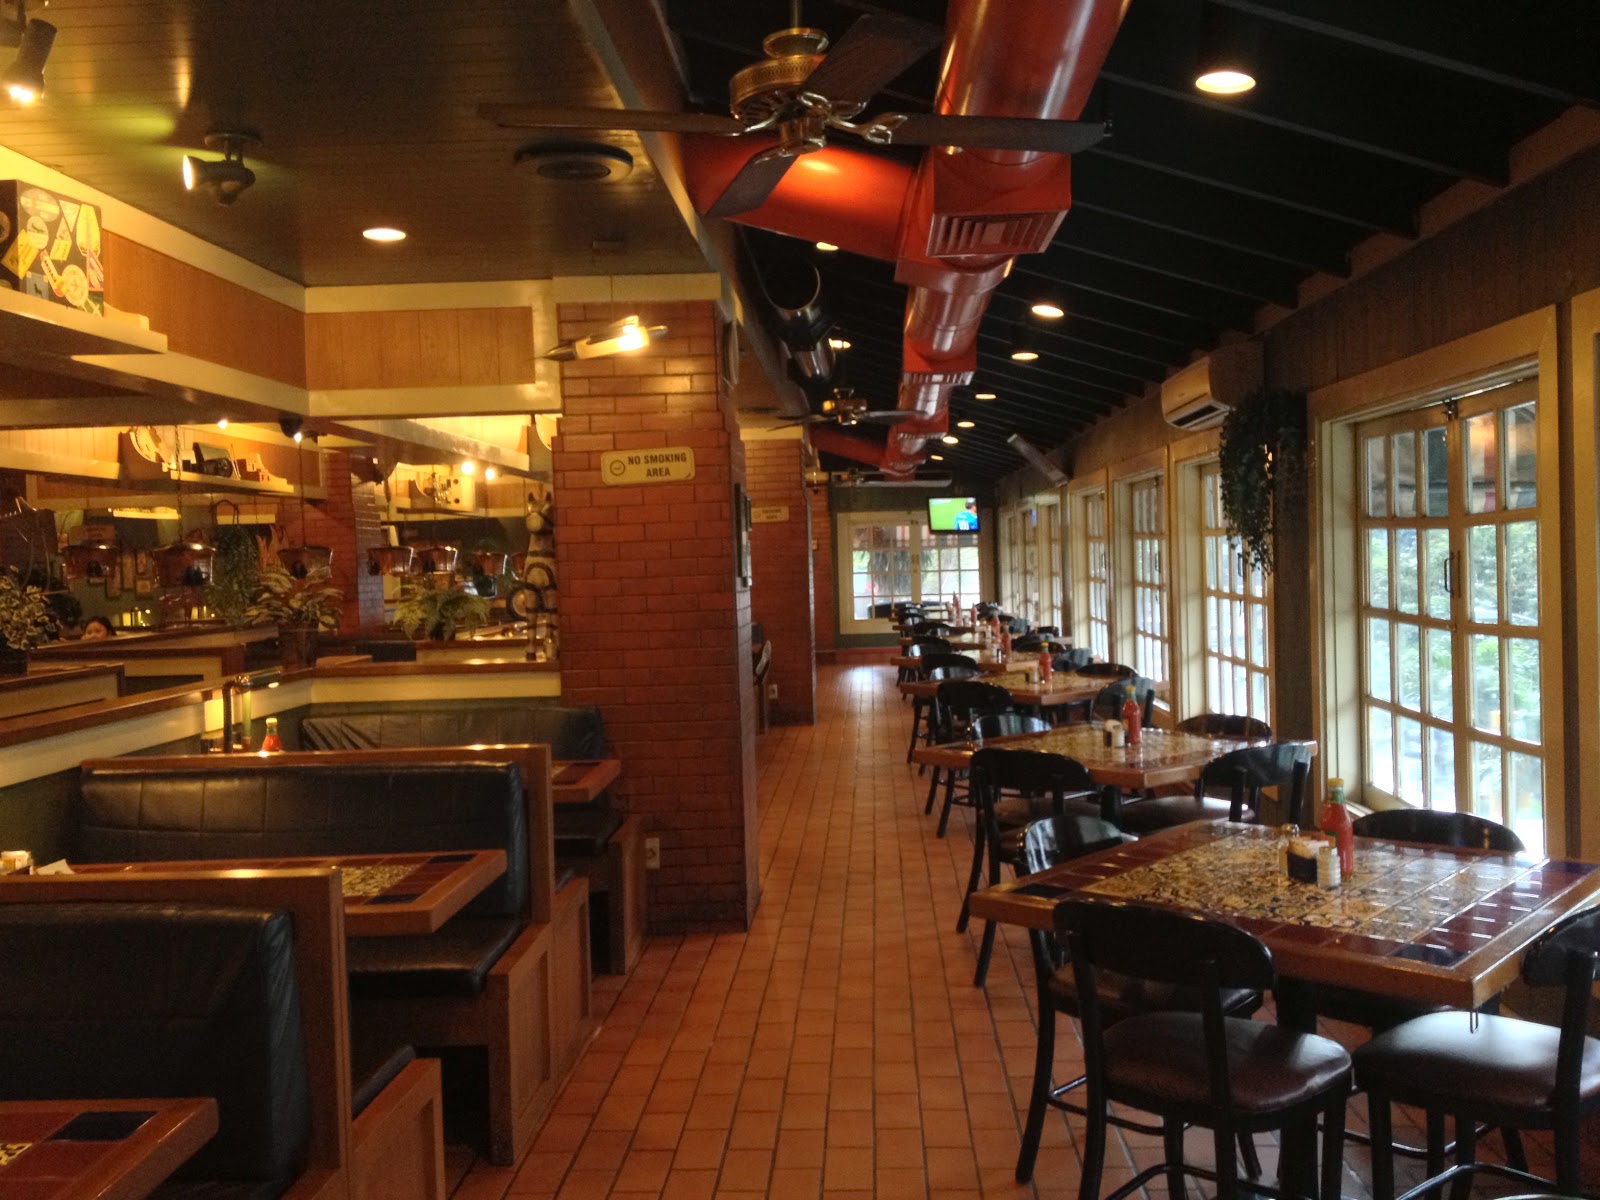 Sweet Lovely Journey: Chili's Grill & Bar